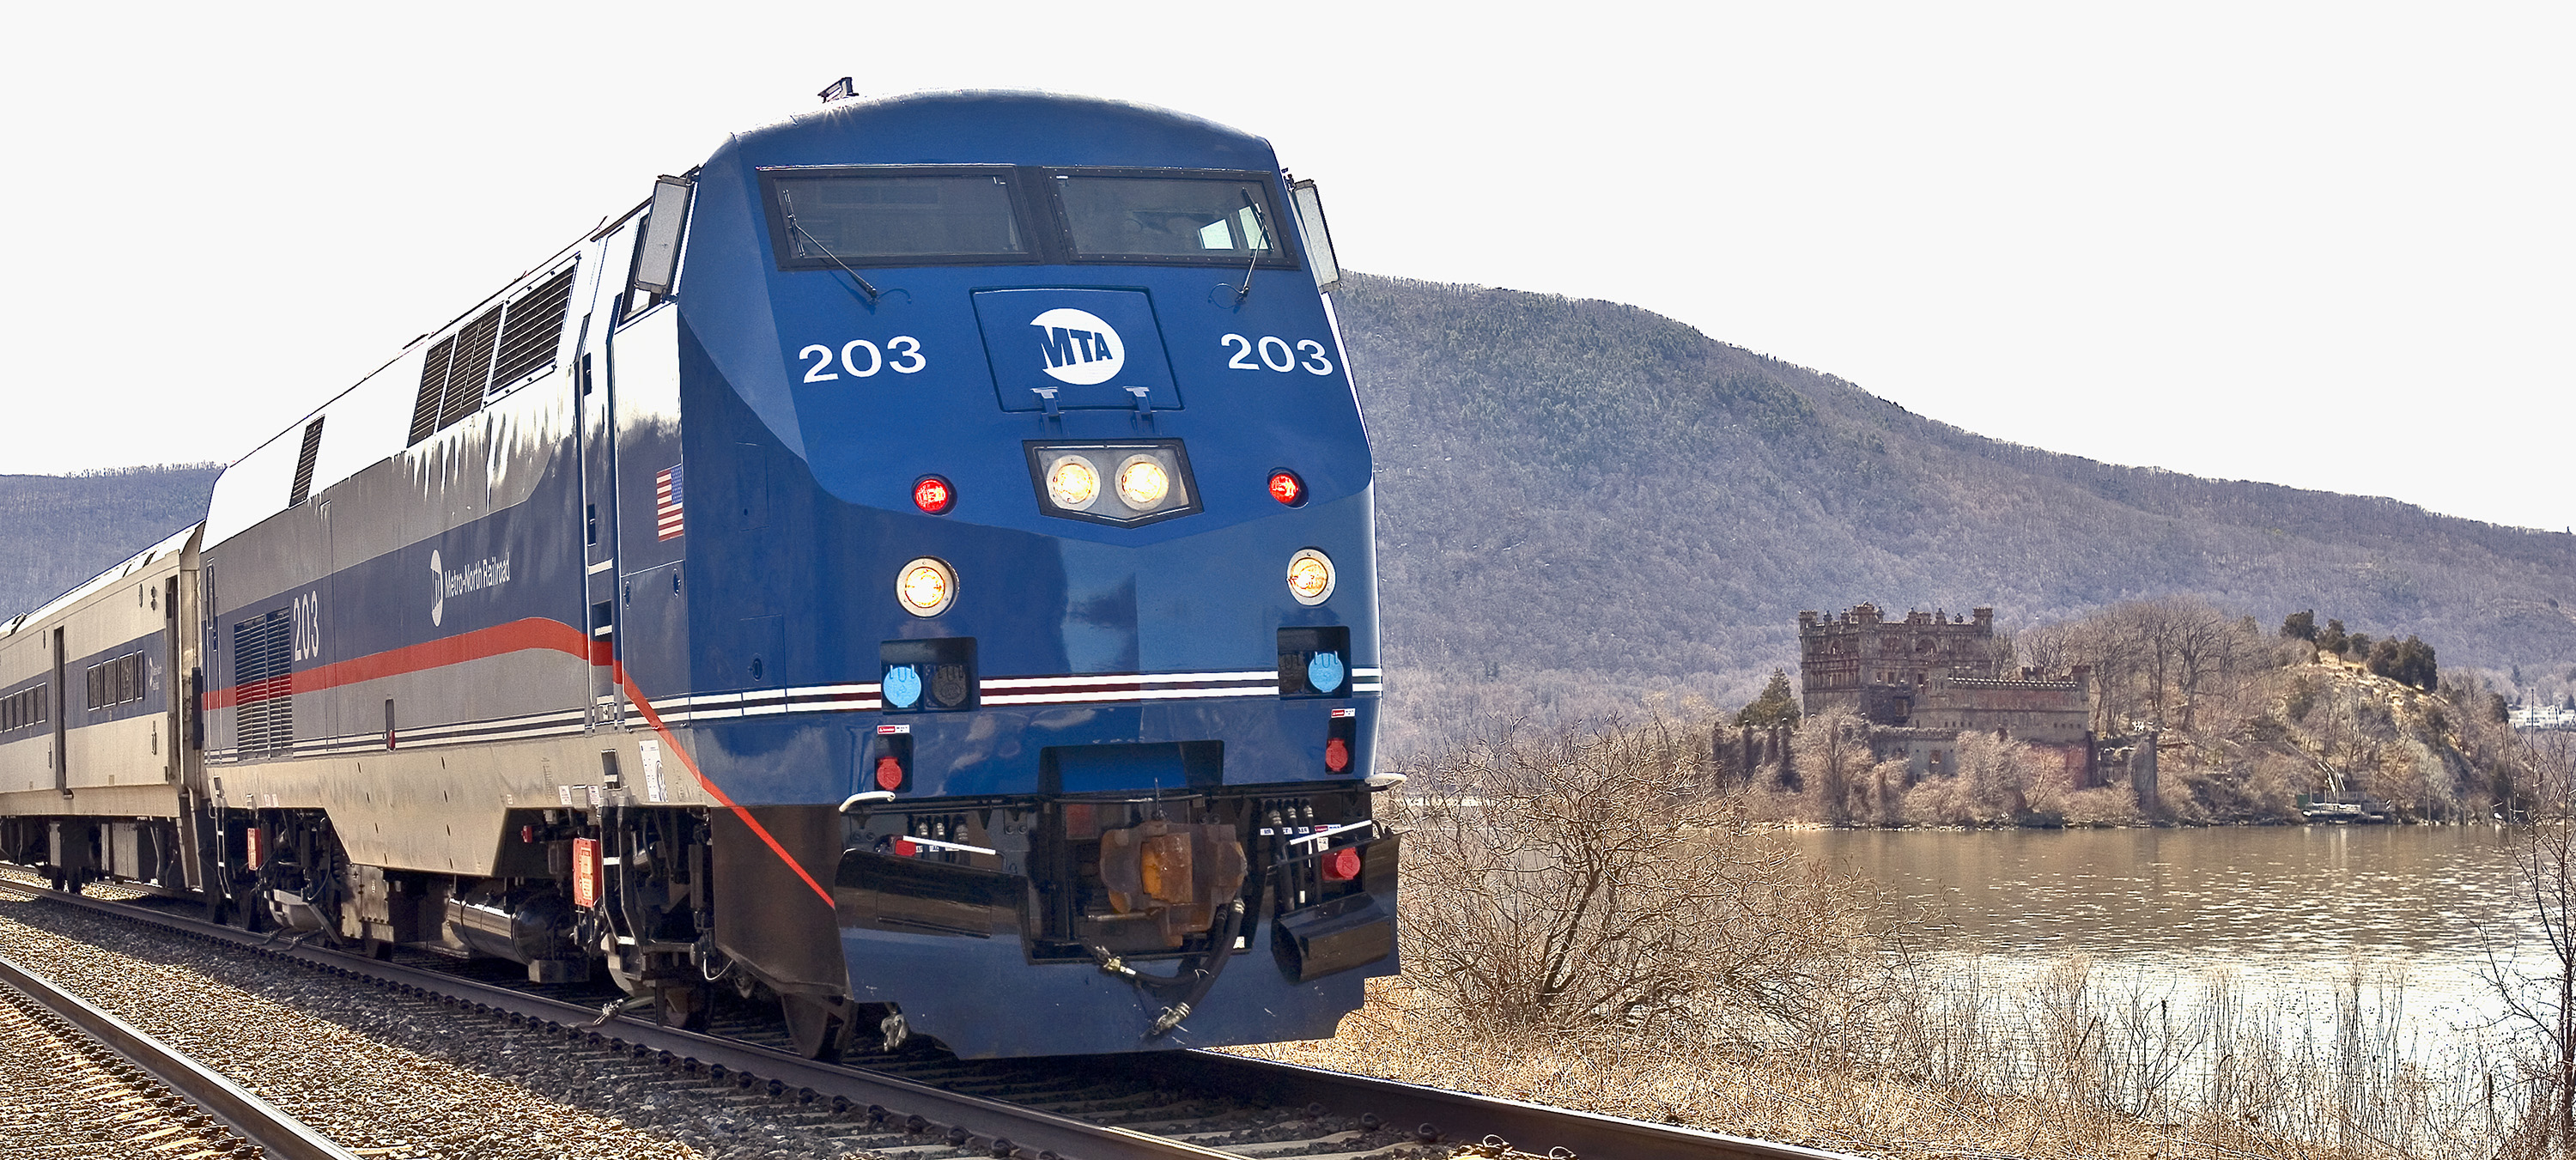 Metro-North Stays On Track With High Level of On-Time Performance